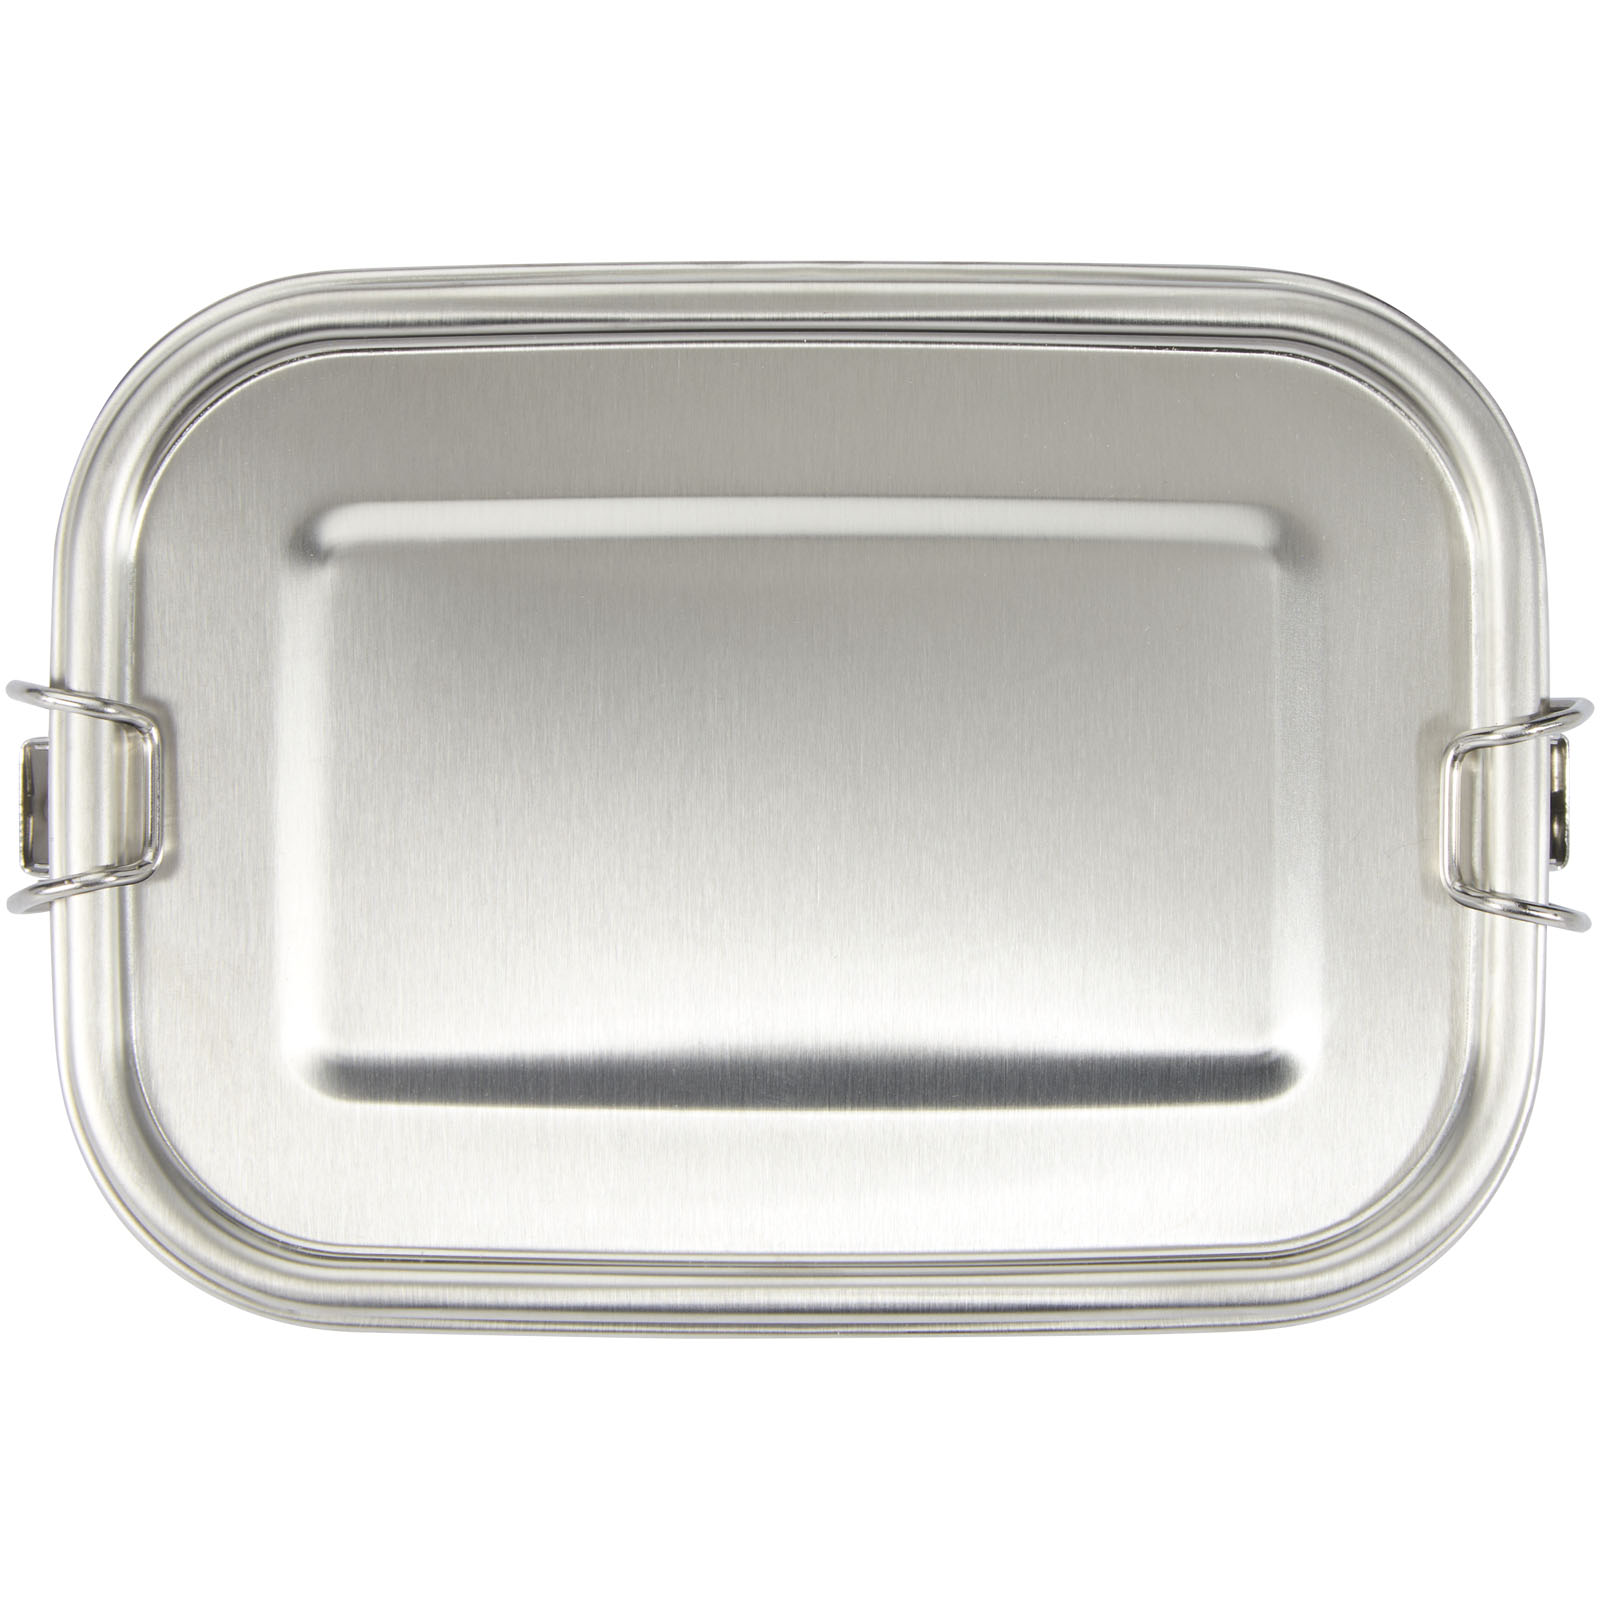 Advertising Lunch Boxes - Titan recycled stainless steel lunch box - 2